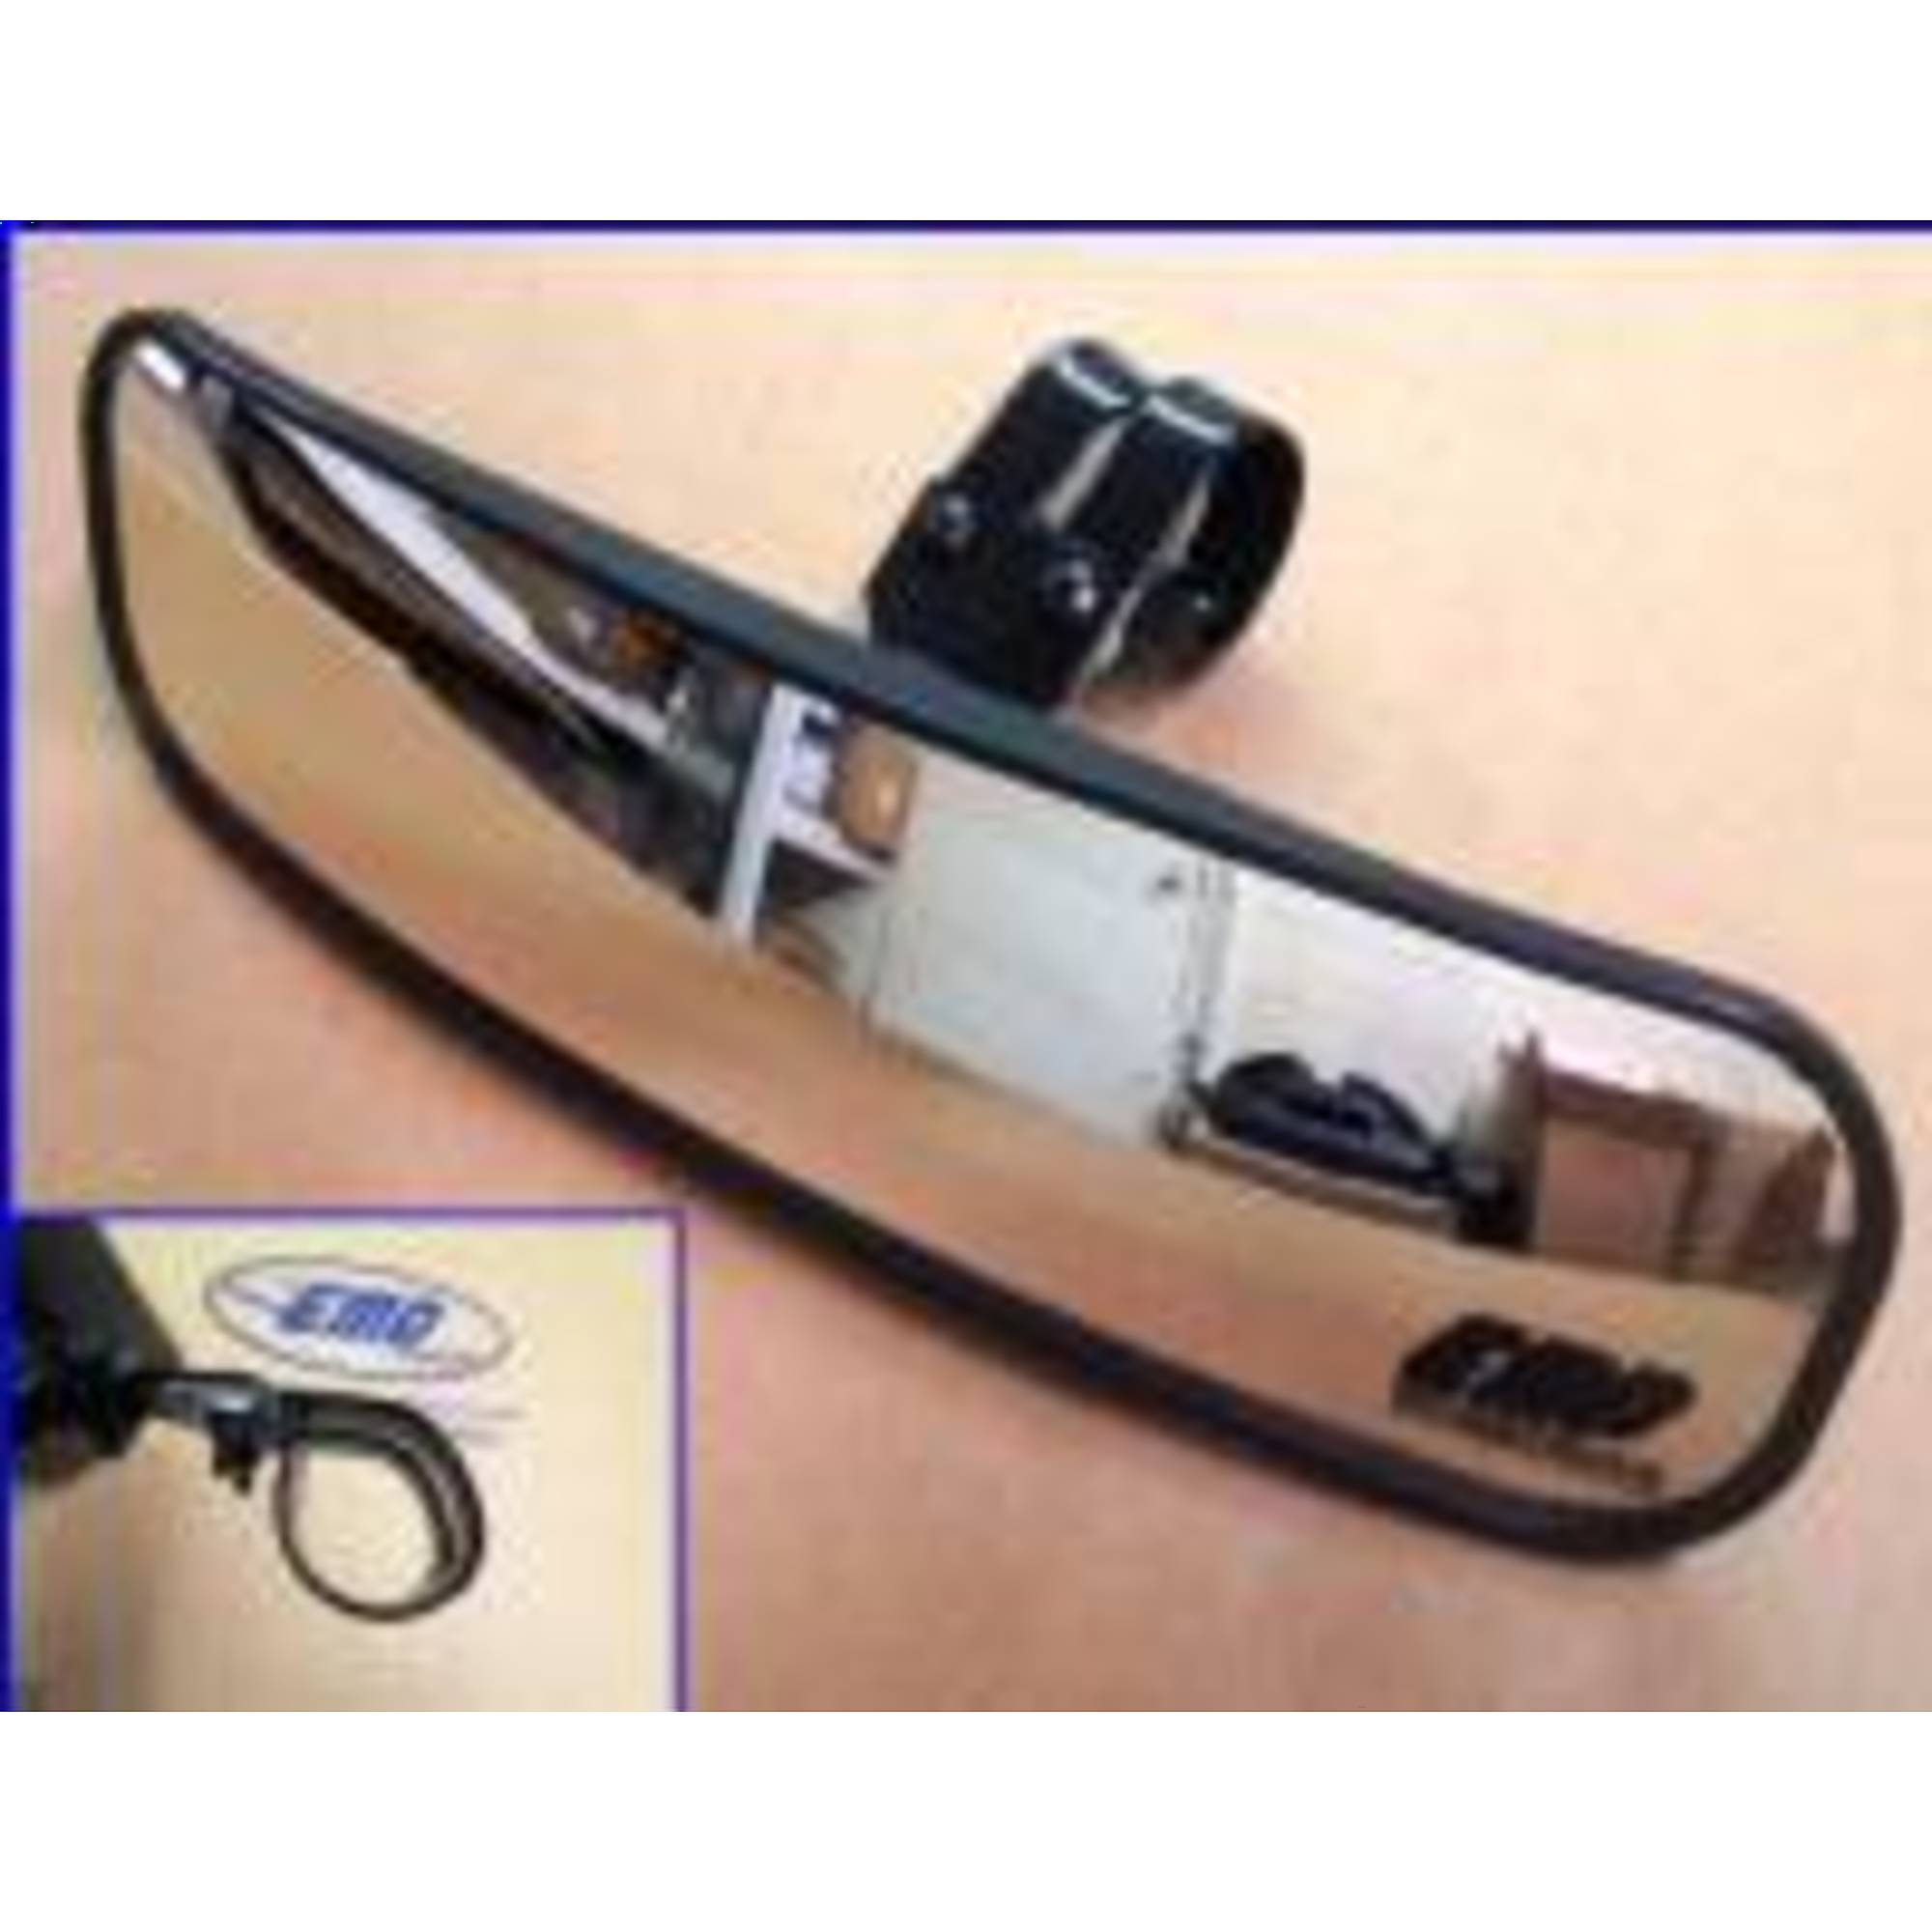 Panoramic Rear Mirror (1-1/2Inch) - (1-5/8Inch), Model - Extreme Metal Products 12533-1.5-1.625 inch